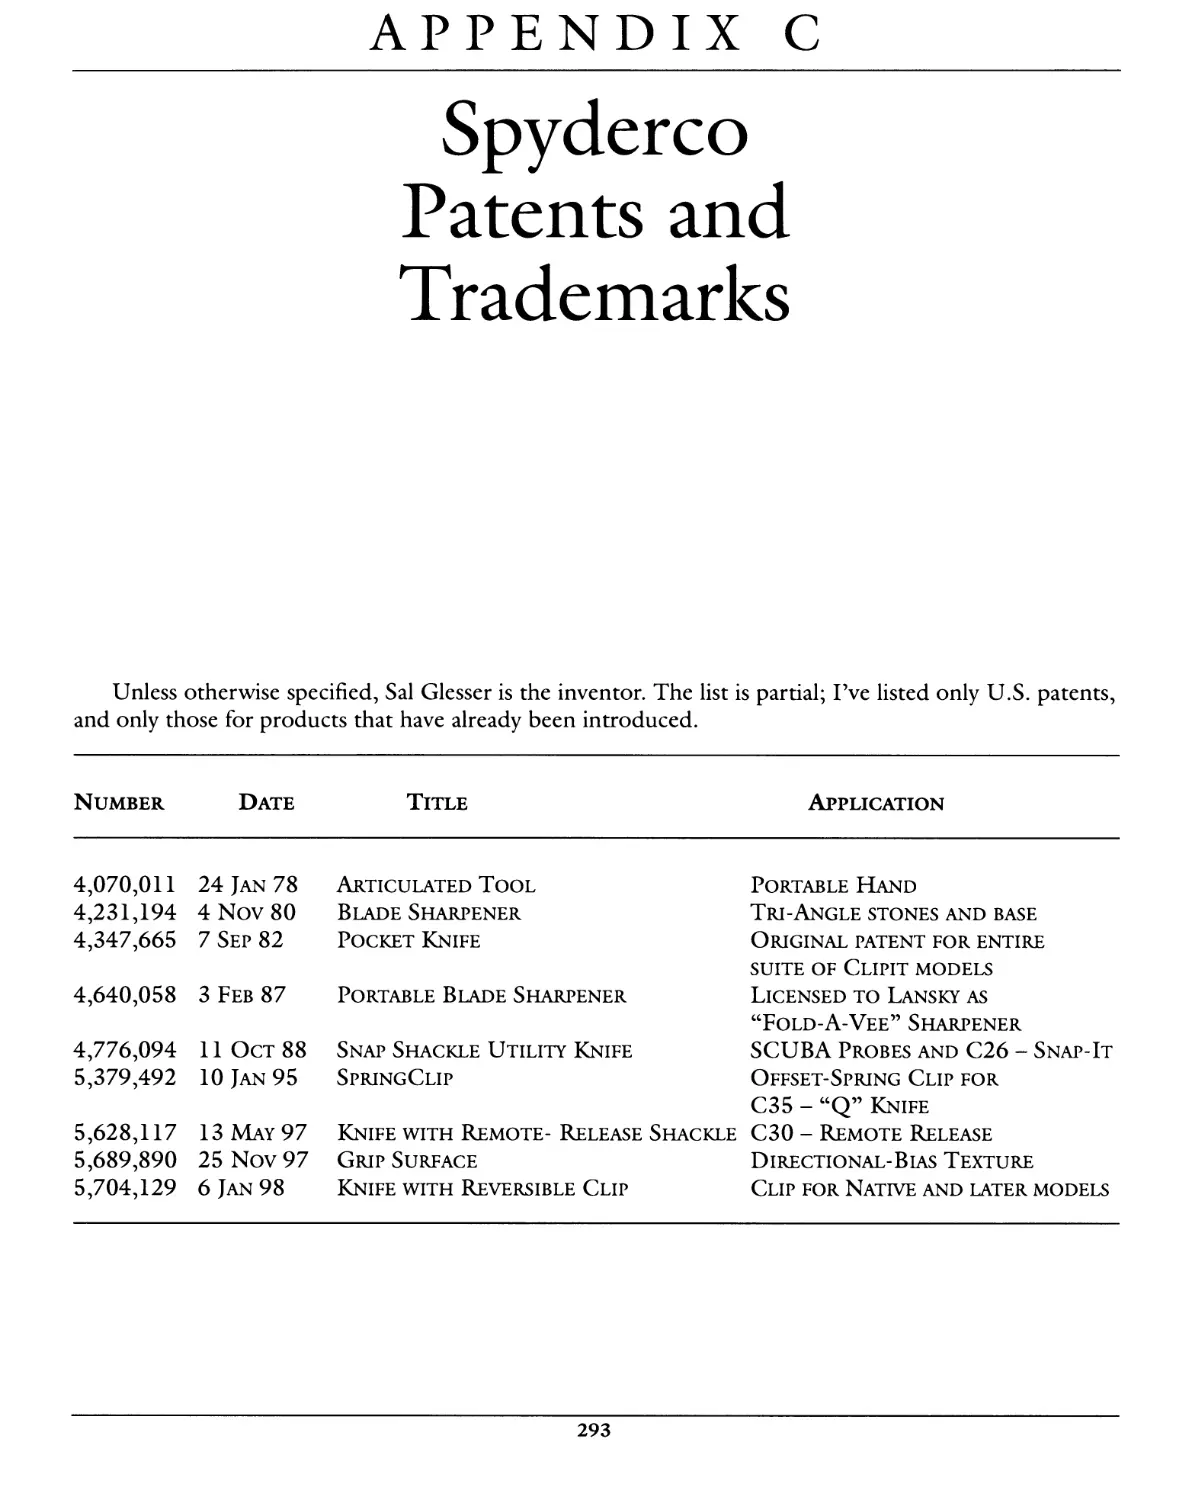 APPENDIX C: SPYDERCO PATENTS AND TRADEMARKS